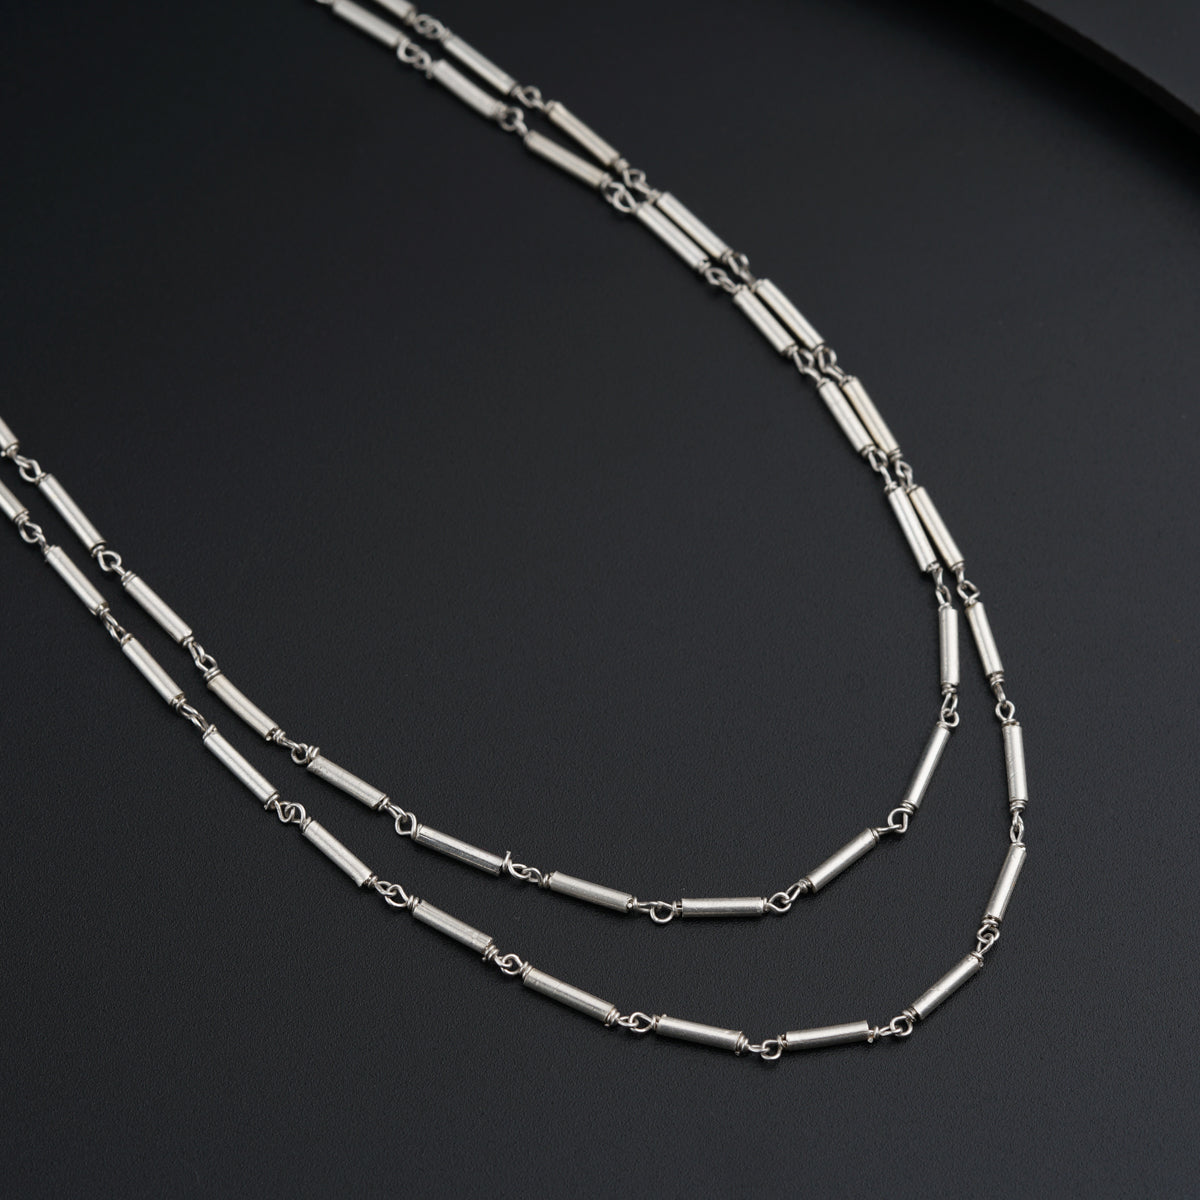 a long silver chain with two links on a black surface